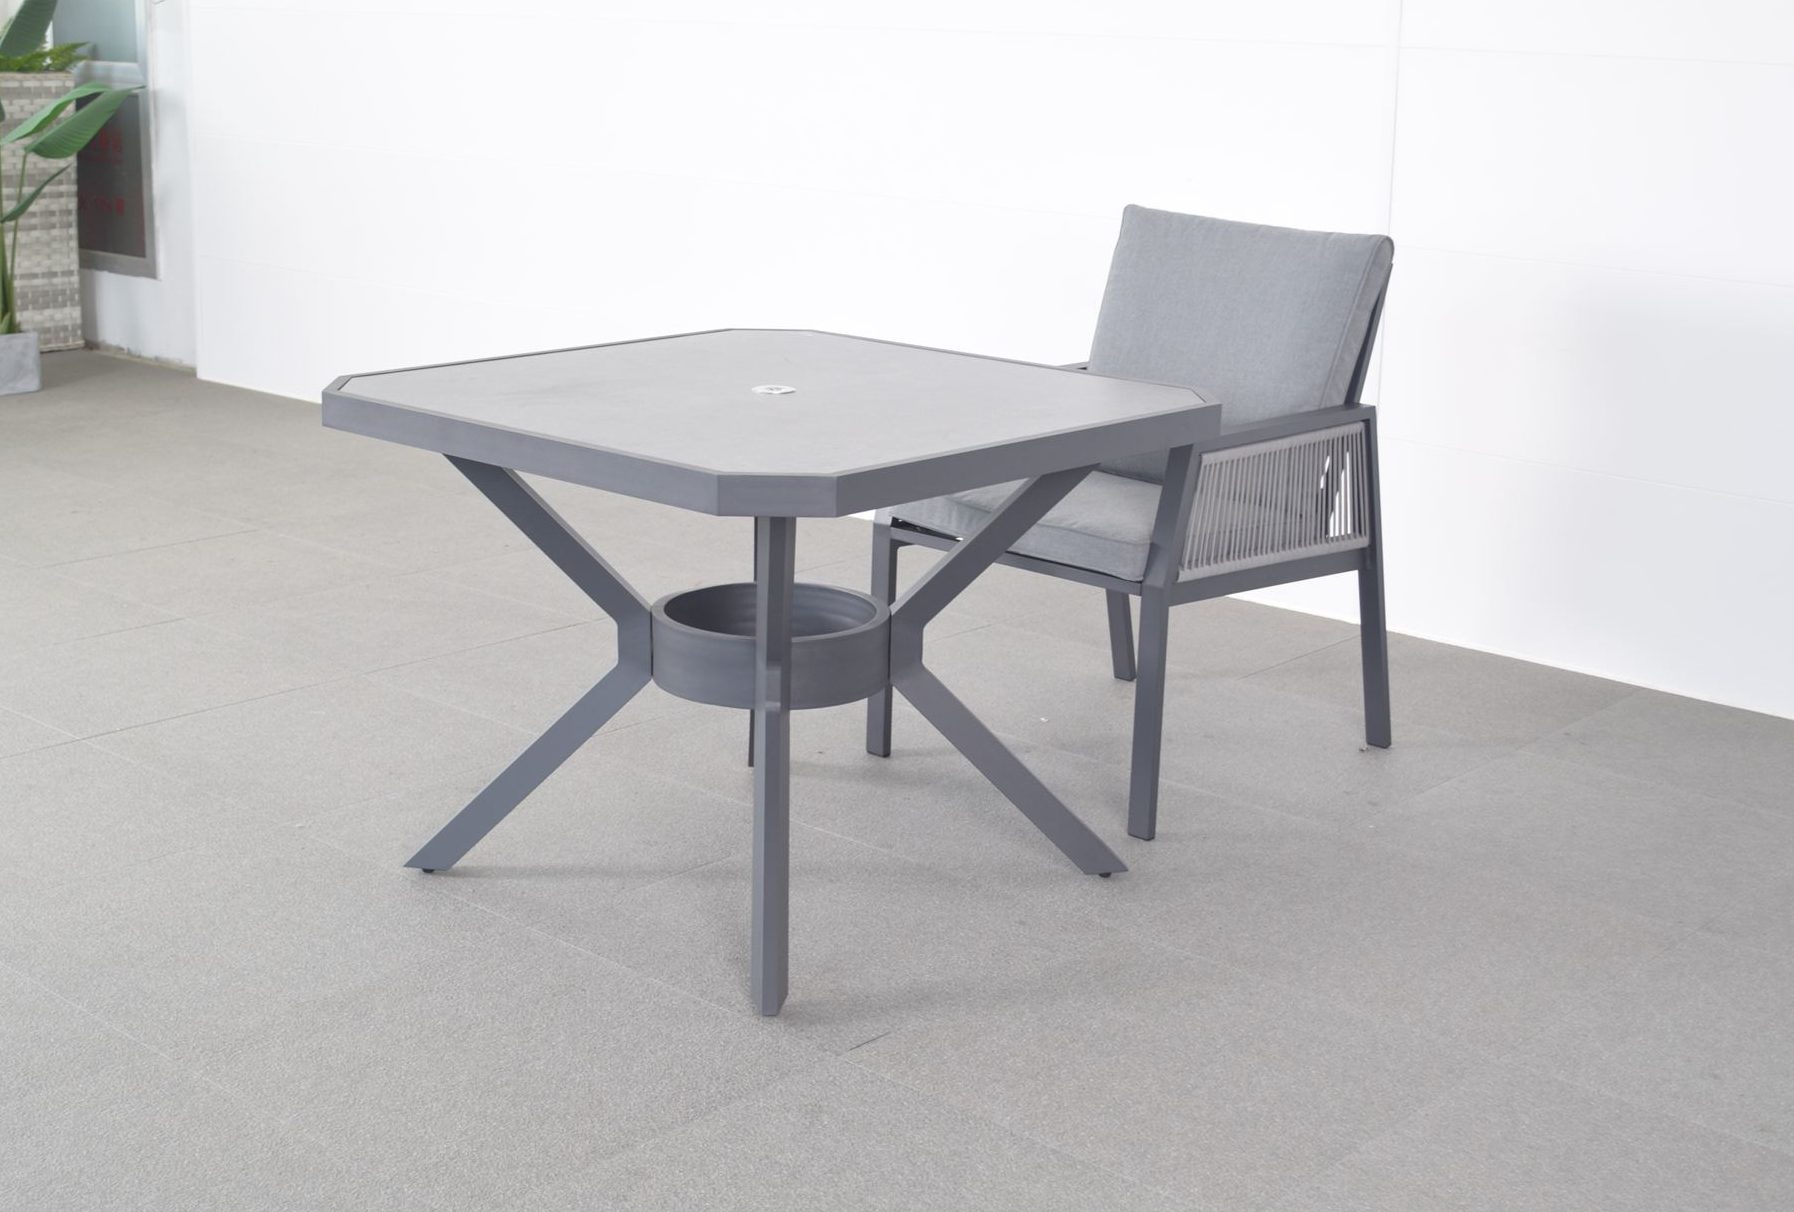 Bettina 4 Seater Square Table